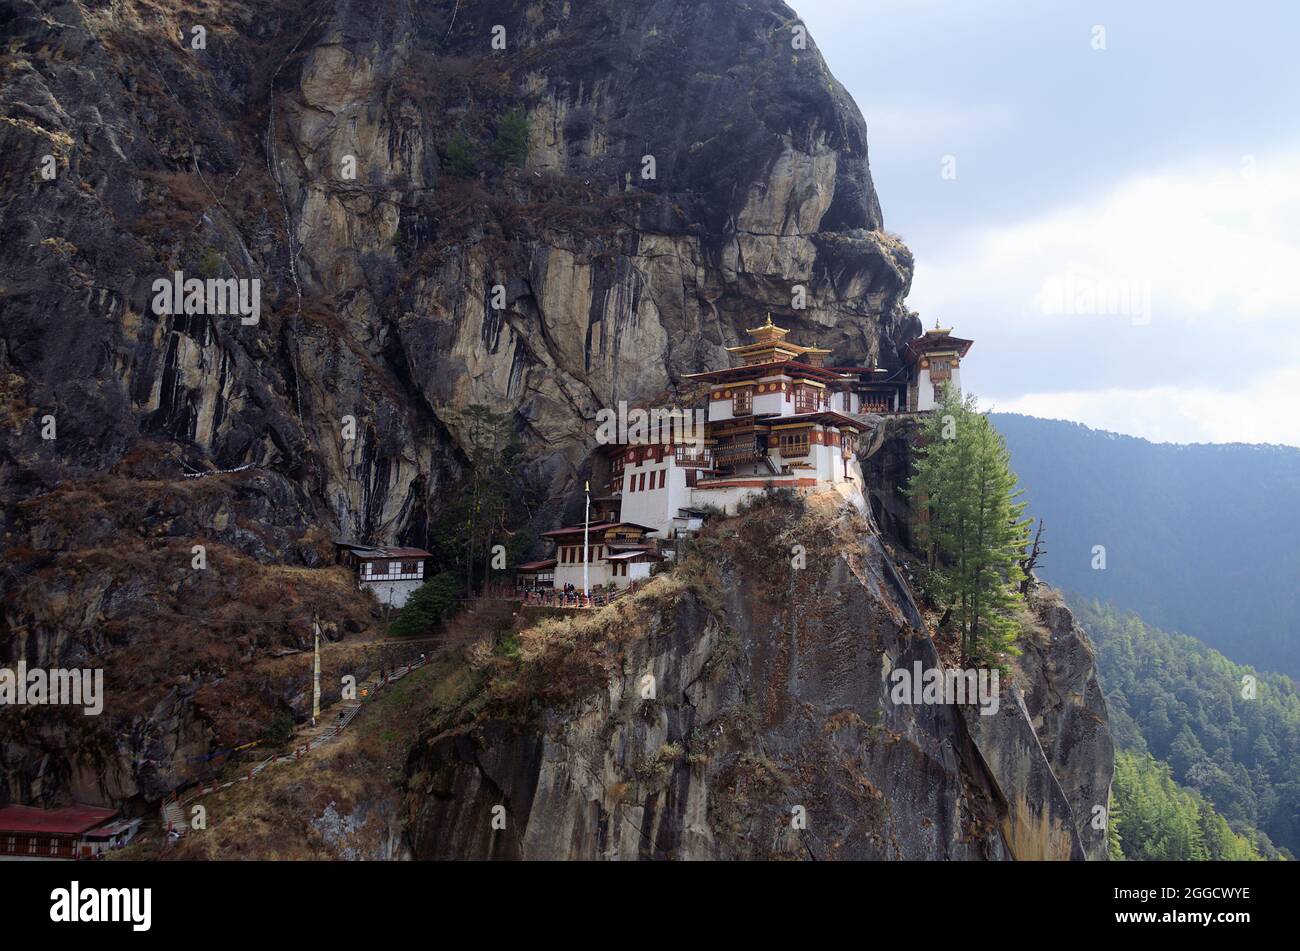 Wide angle view of cliffside showing stairs leading to Paro Taktsang or Tiger's Nest Buddhist Monastery, upper Paro valley, Bhutan Stock Photo